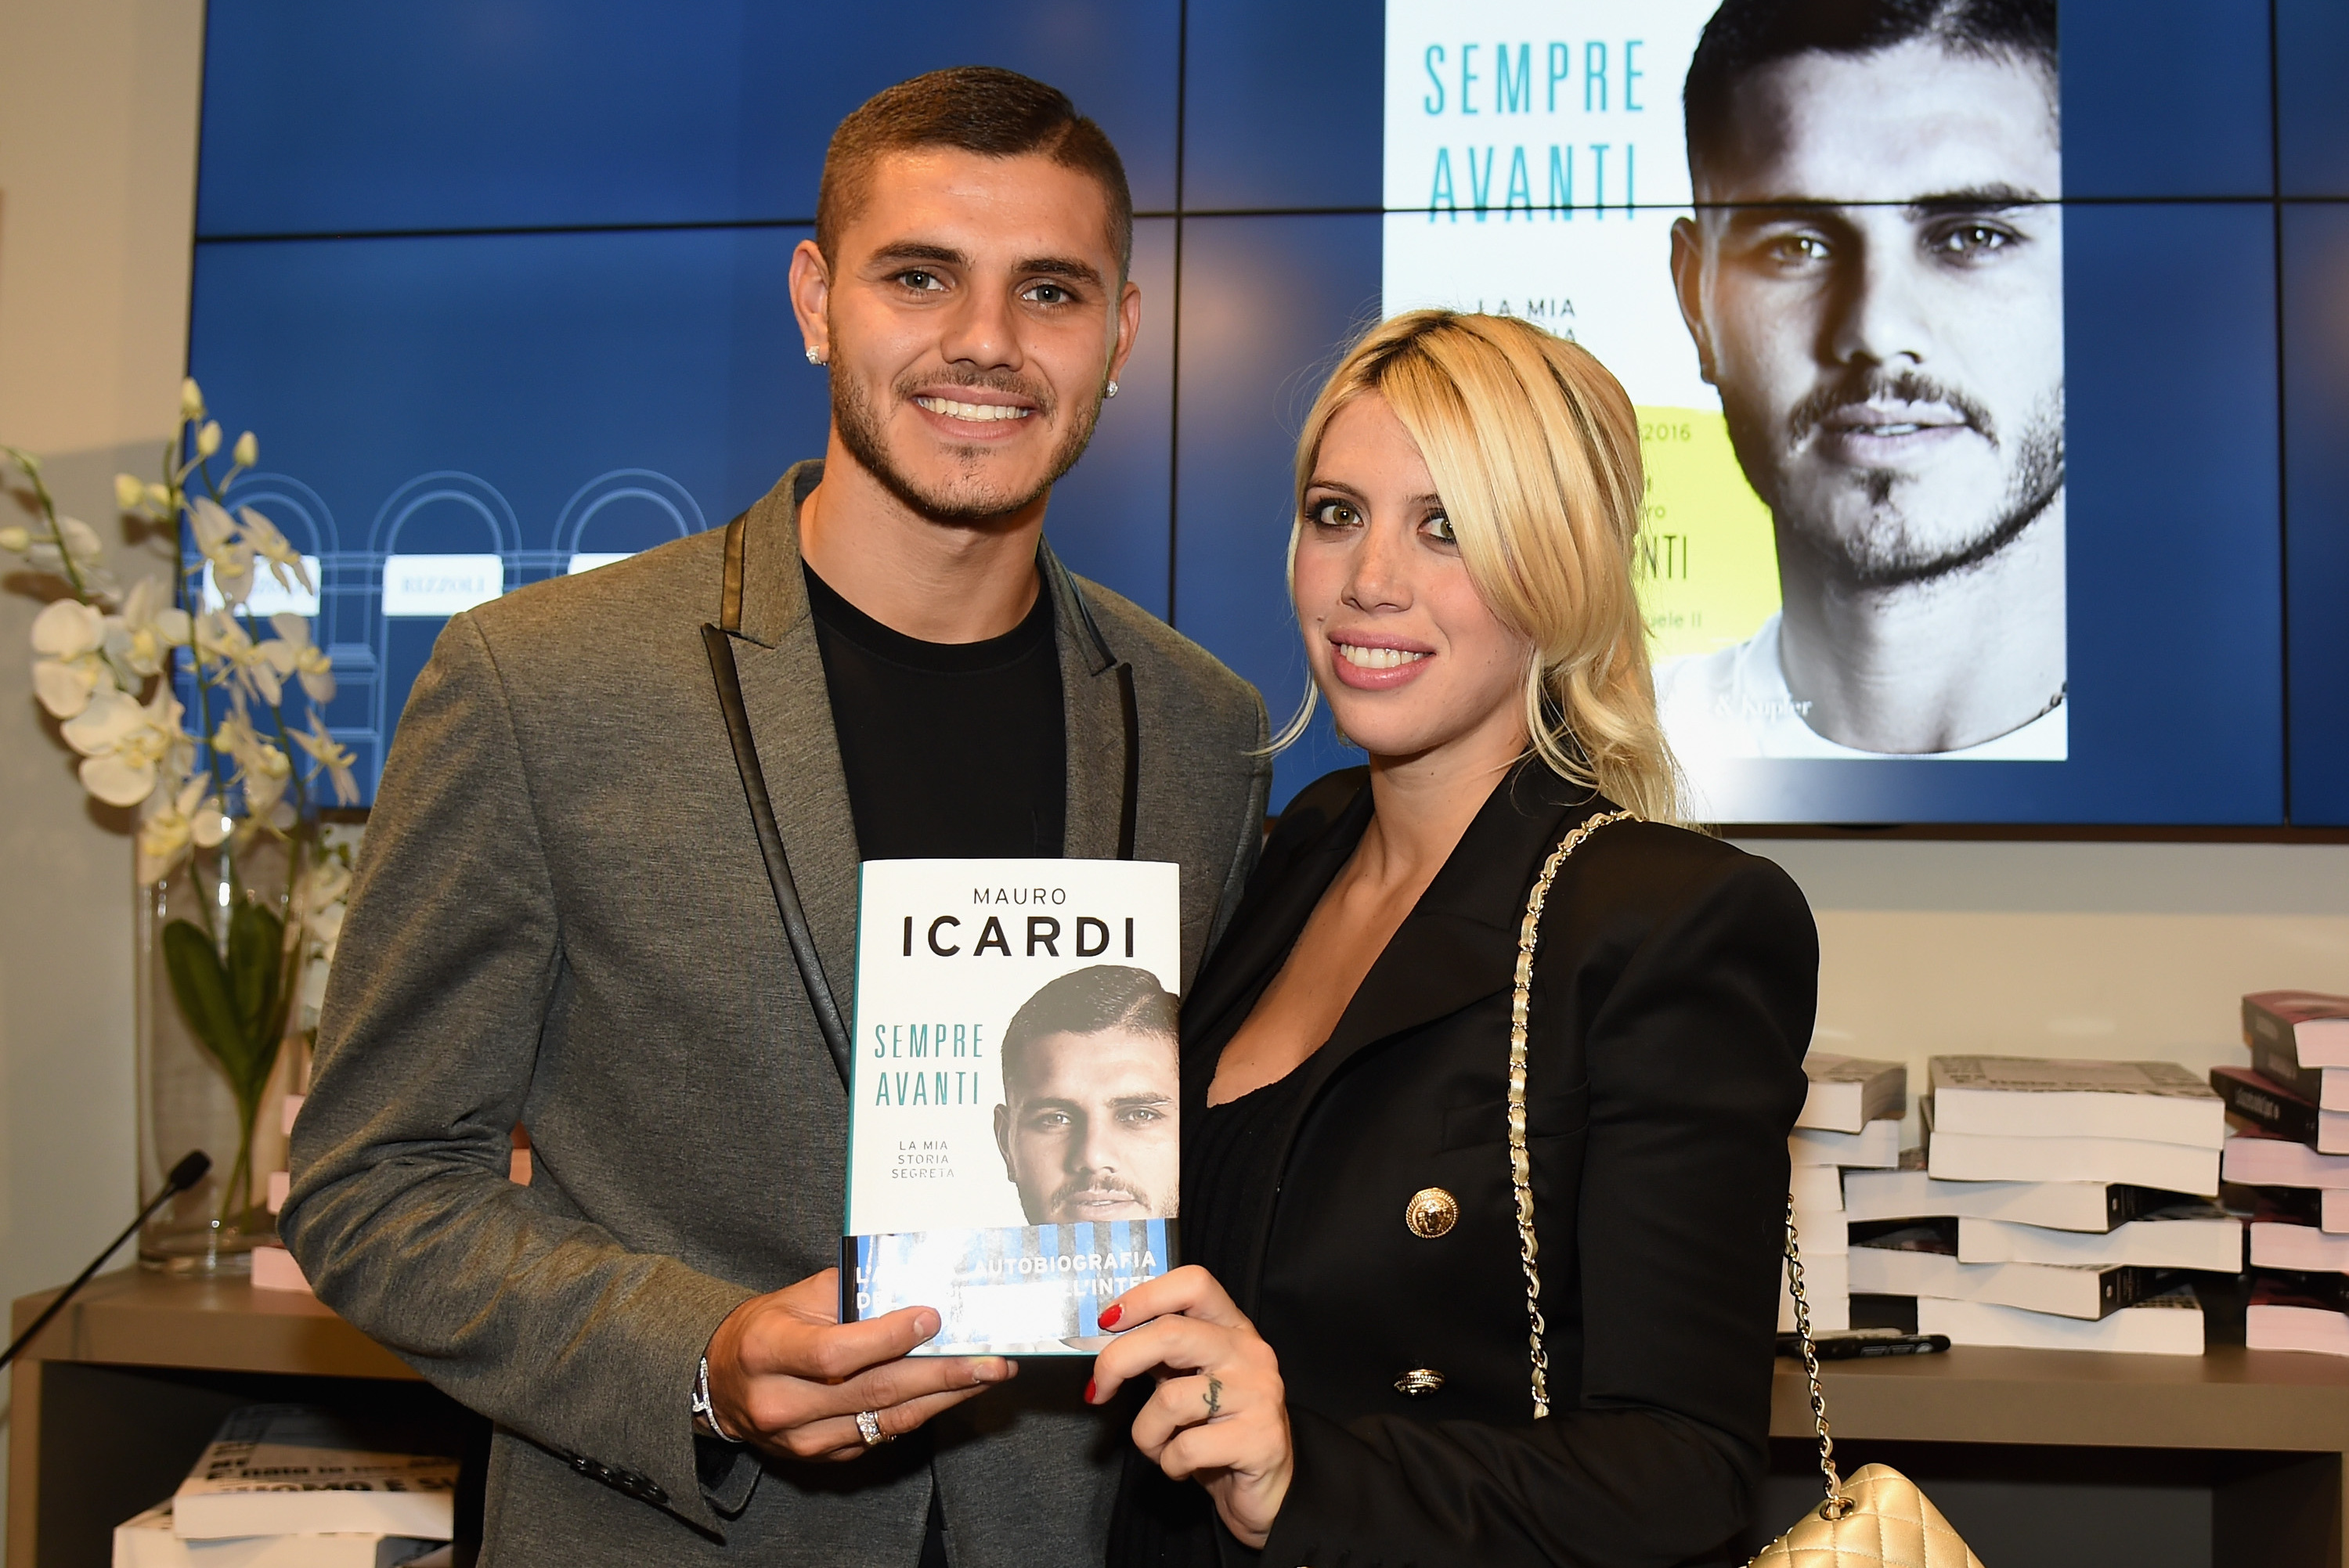 Is Enfant Terrible Mauro Icardi Poised For Greatness For Inter And